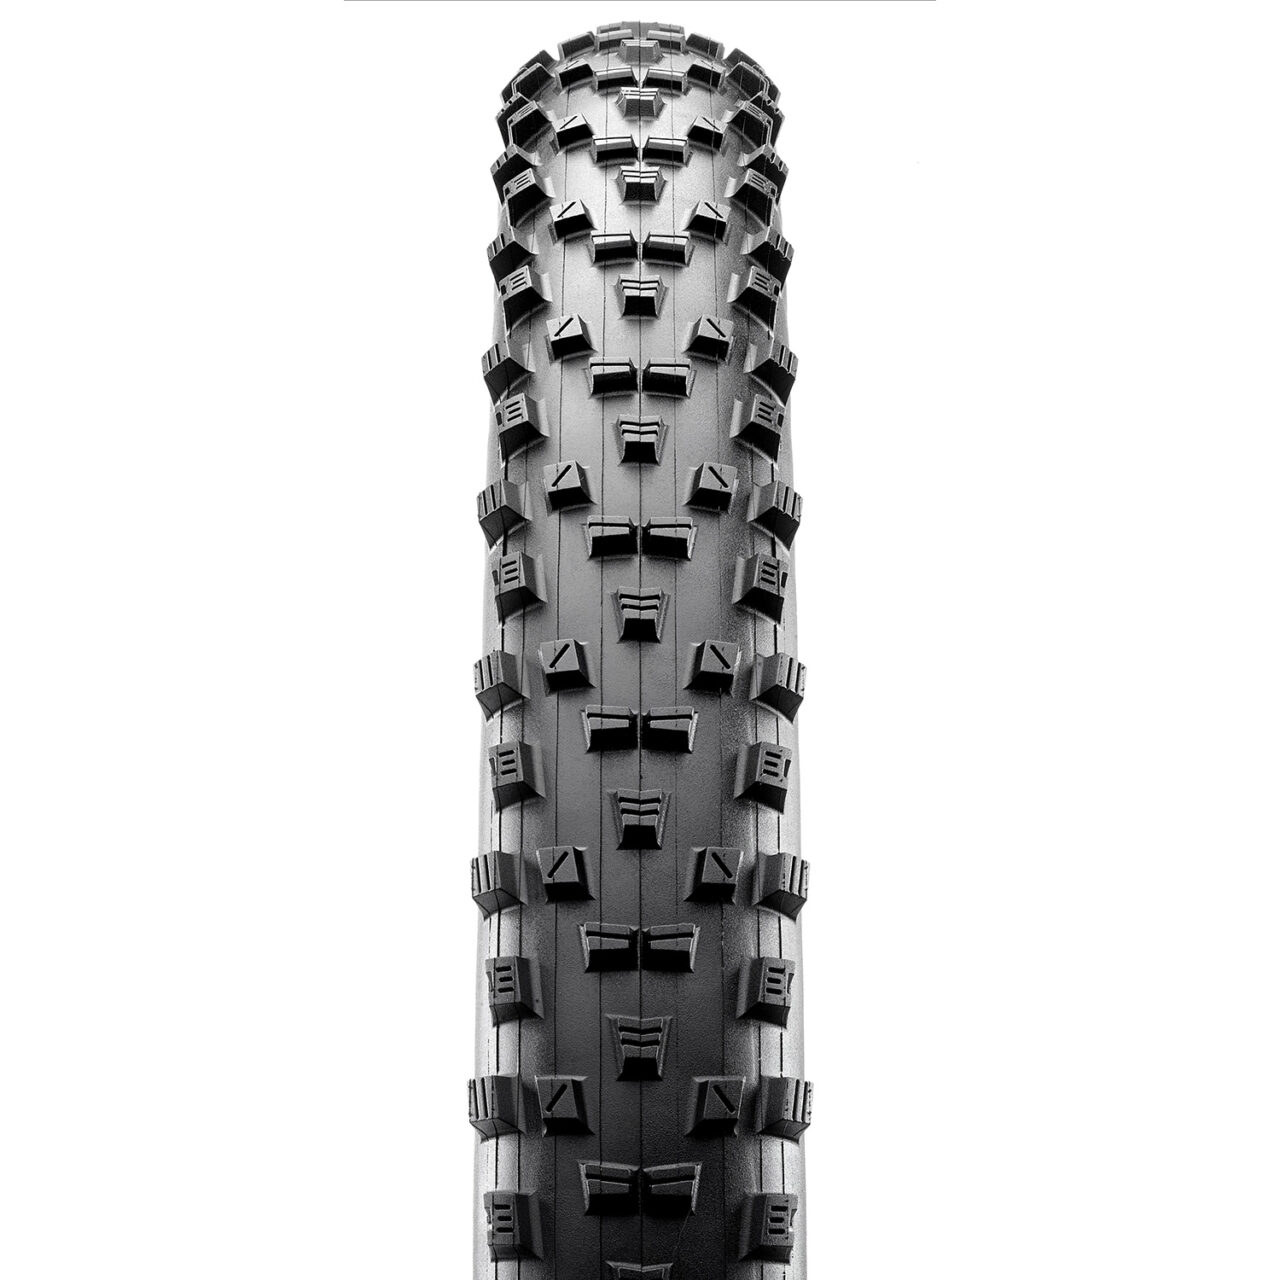 Maxxis Forekaster bicycle tire tread